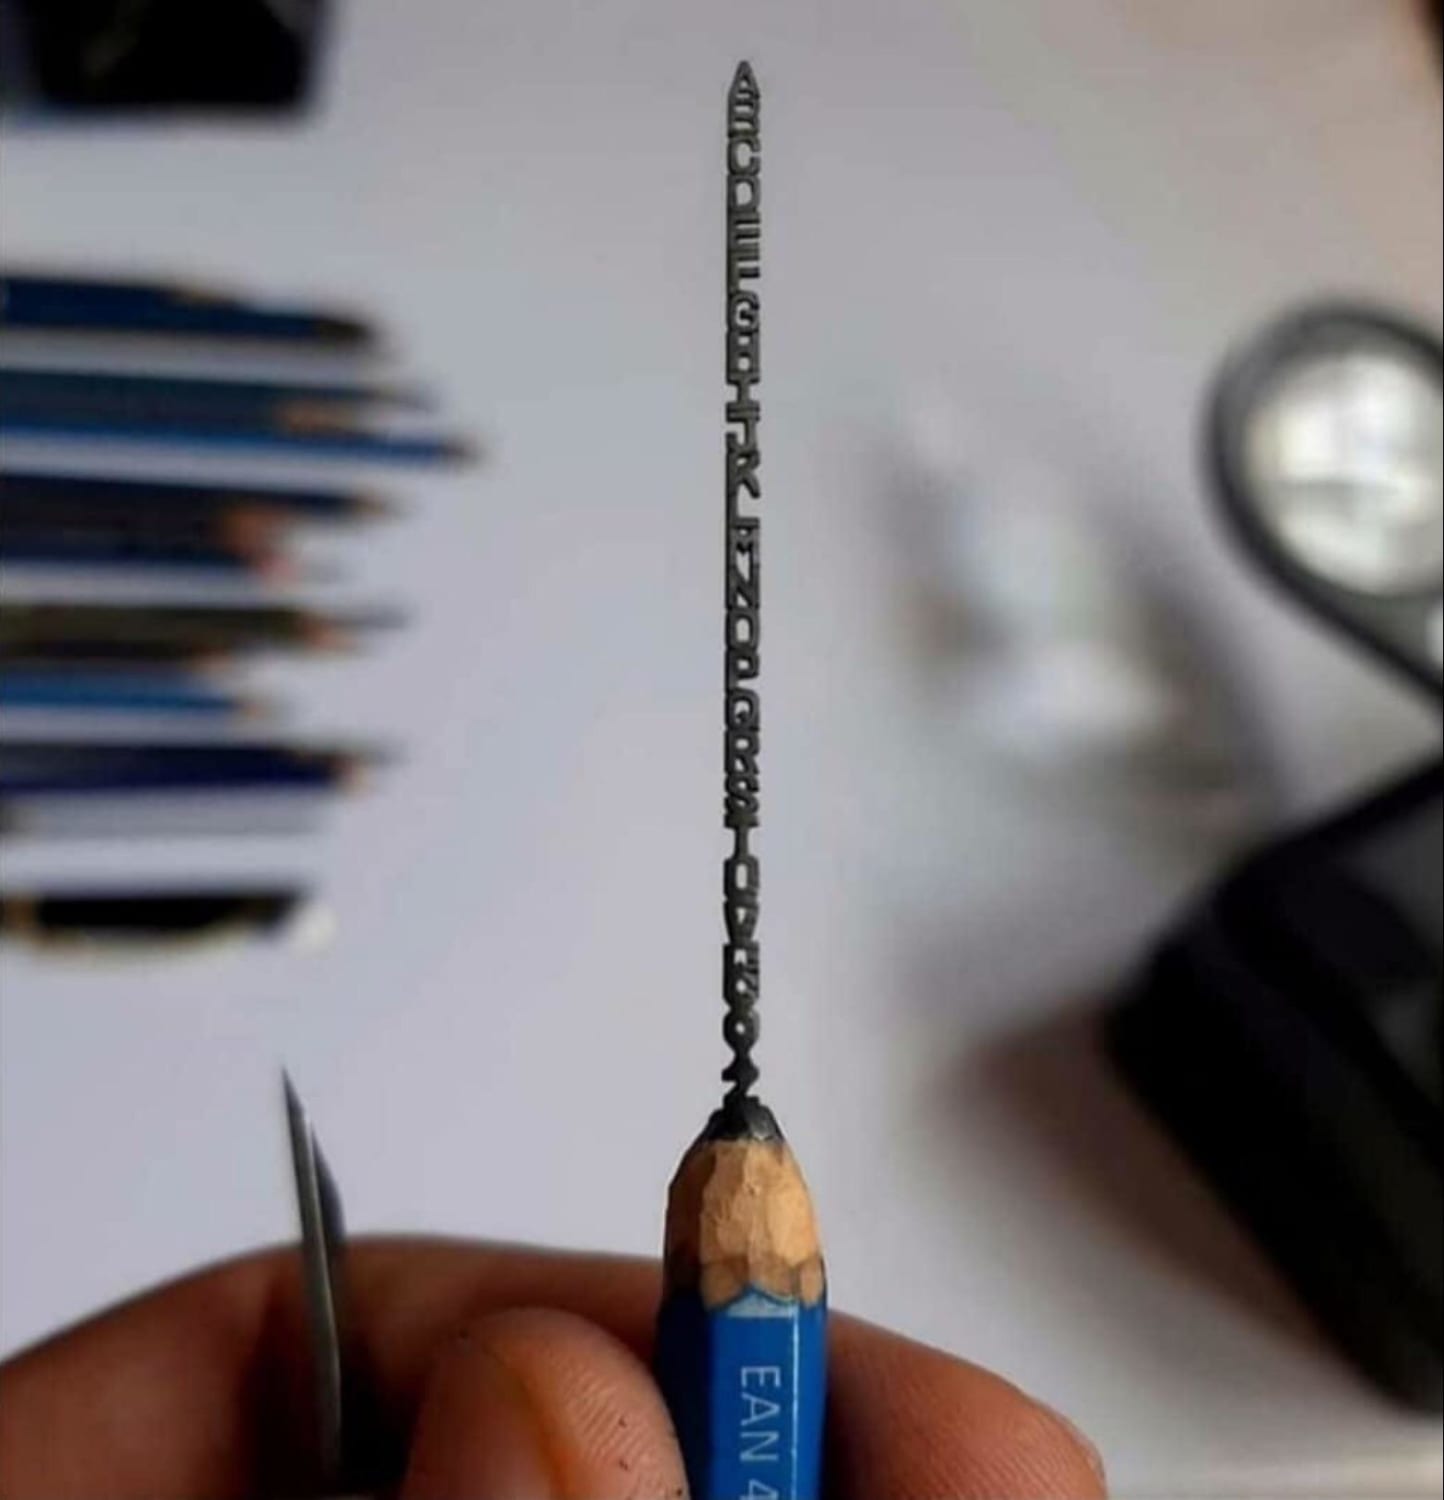 The whole alphabet made on a pencil